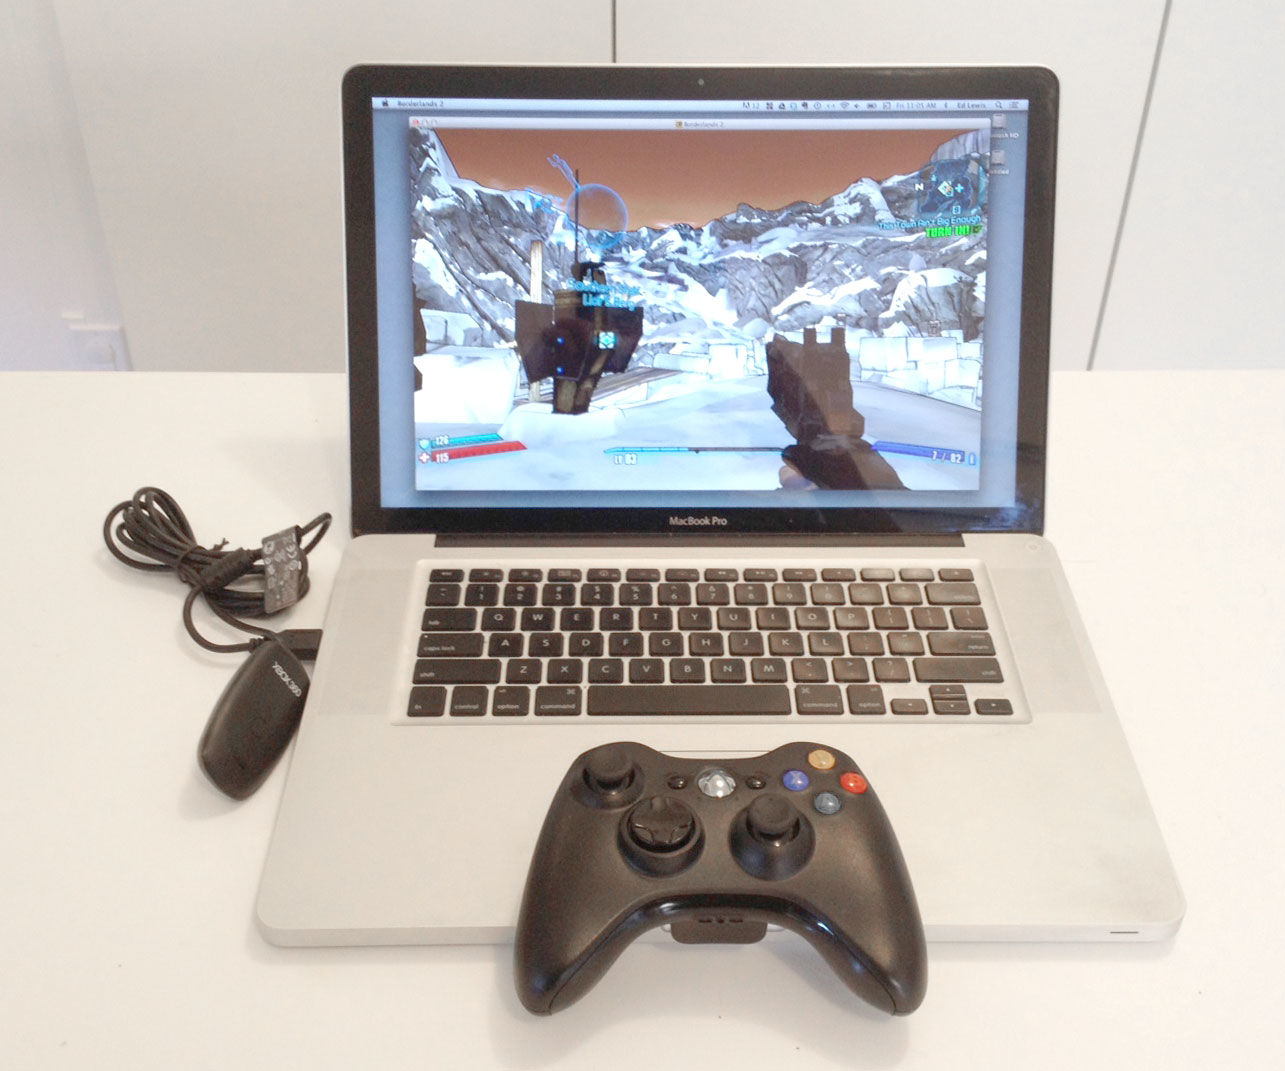 hook up an xbox 360 controller to an imac without any extra equipment for mac os x sierra